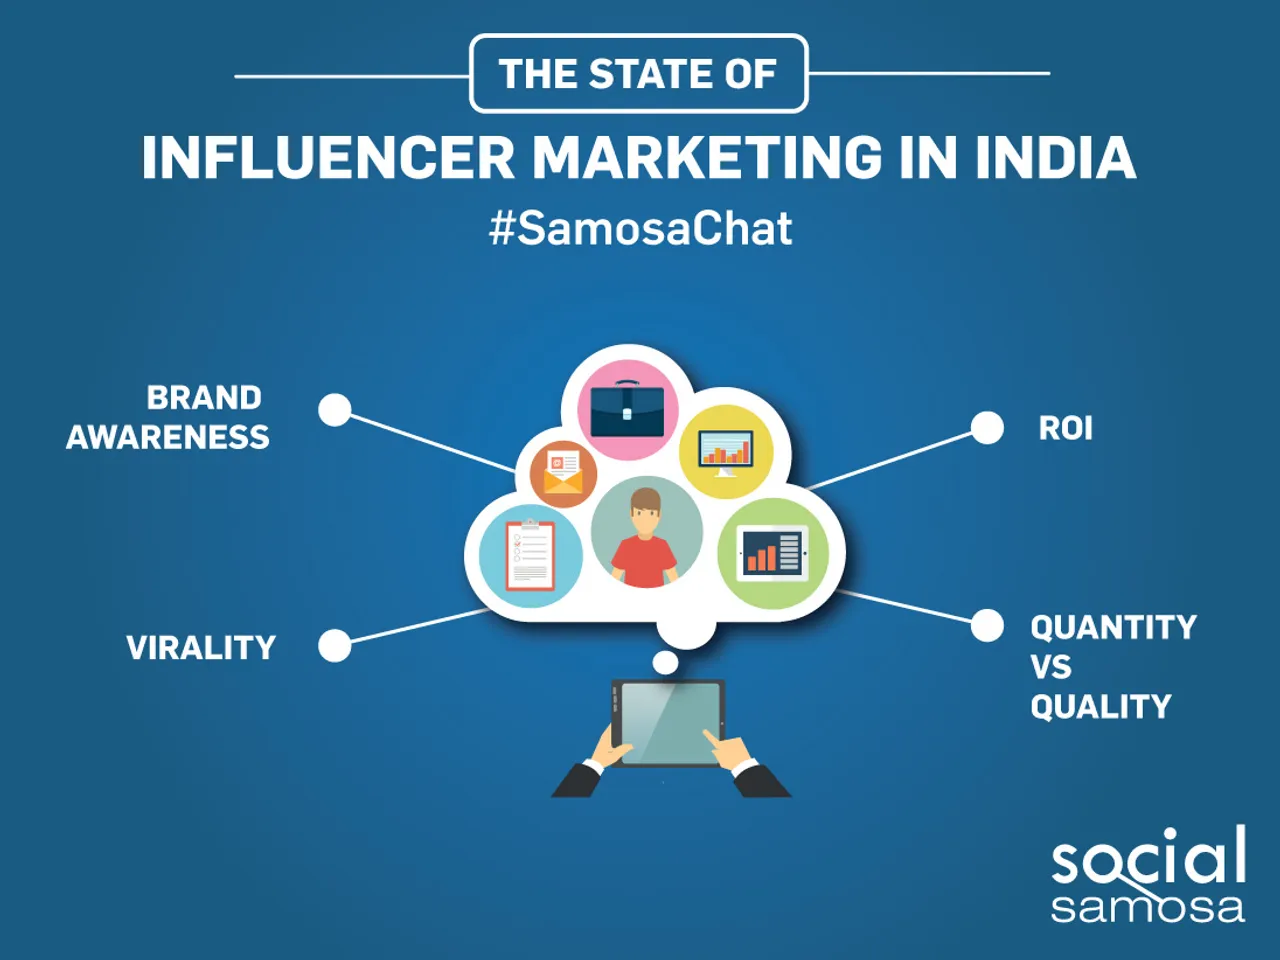 A walkthrough the state of influencer marketing in India